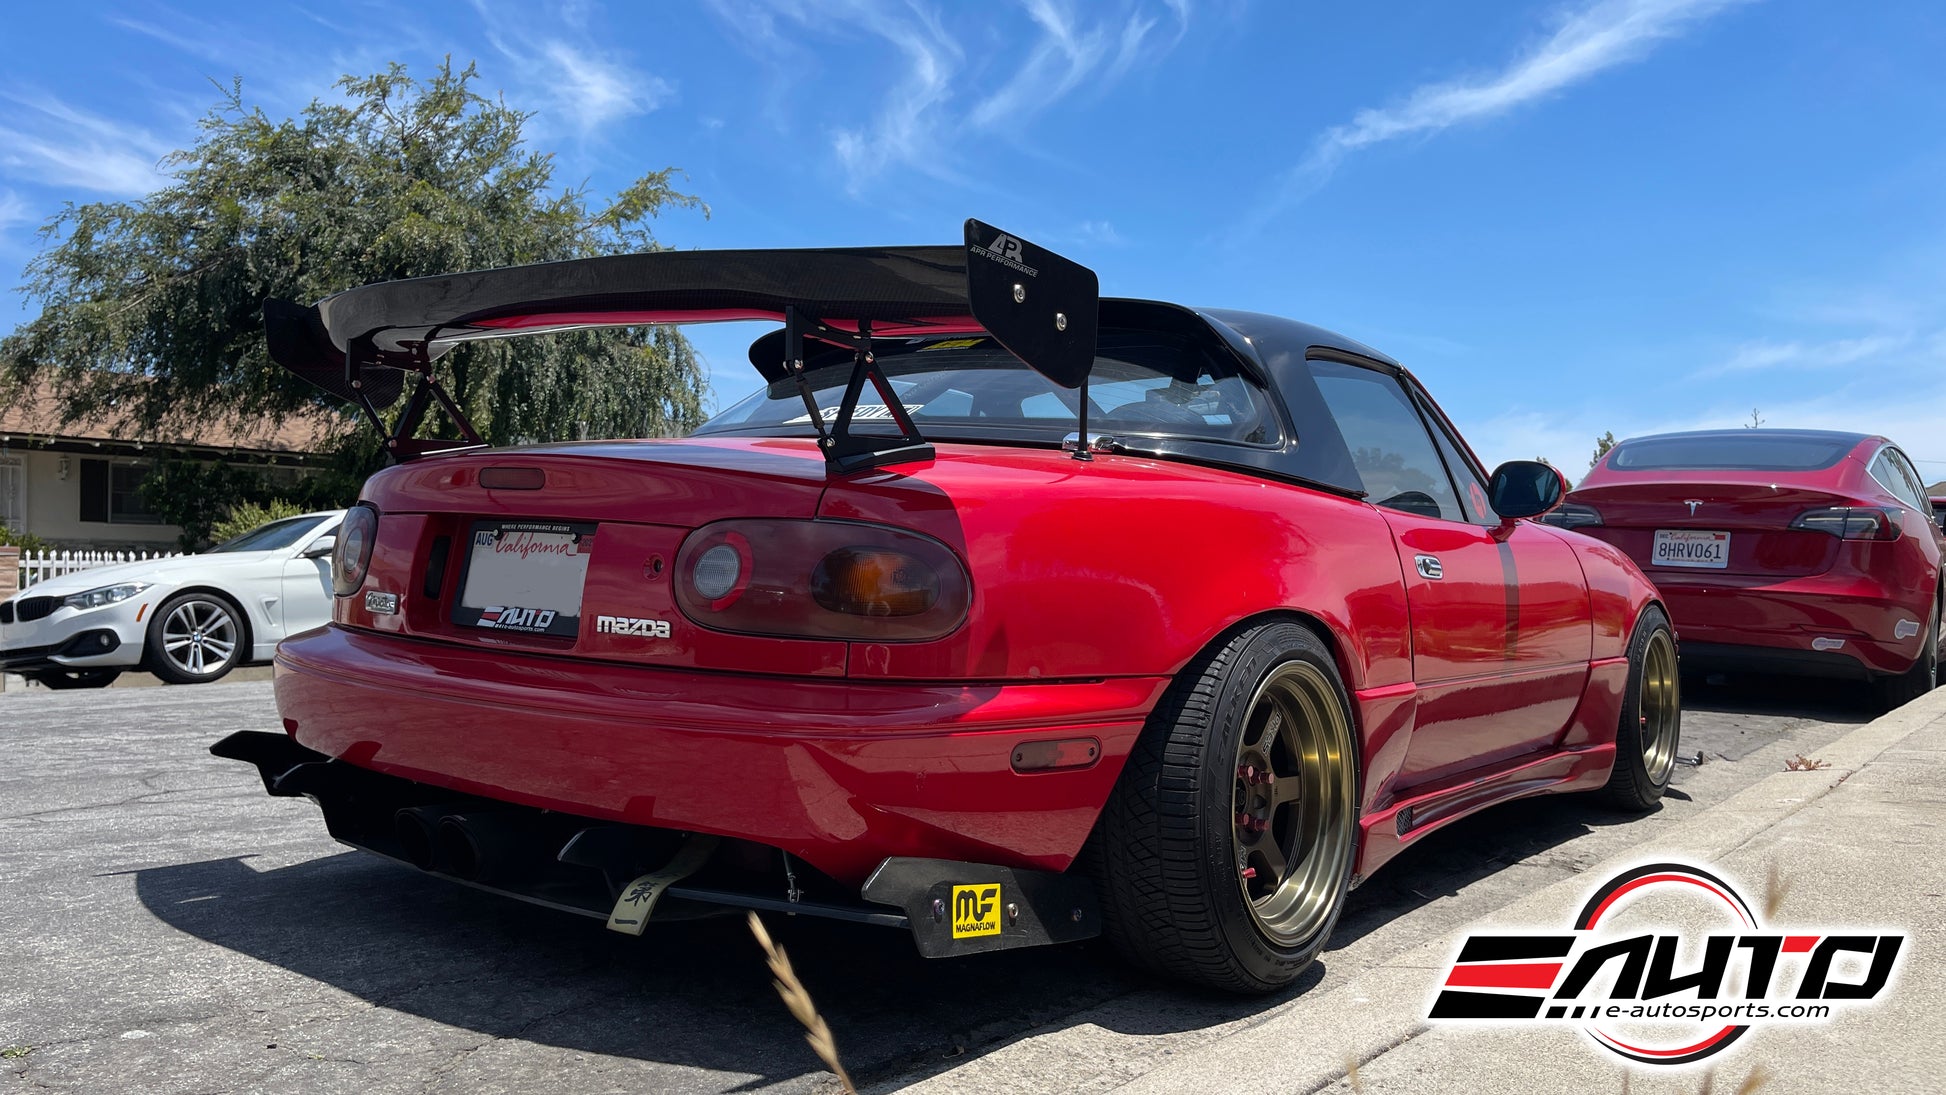  APR Spoiler Wing AS-105907 on 1990 NA Red Miata